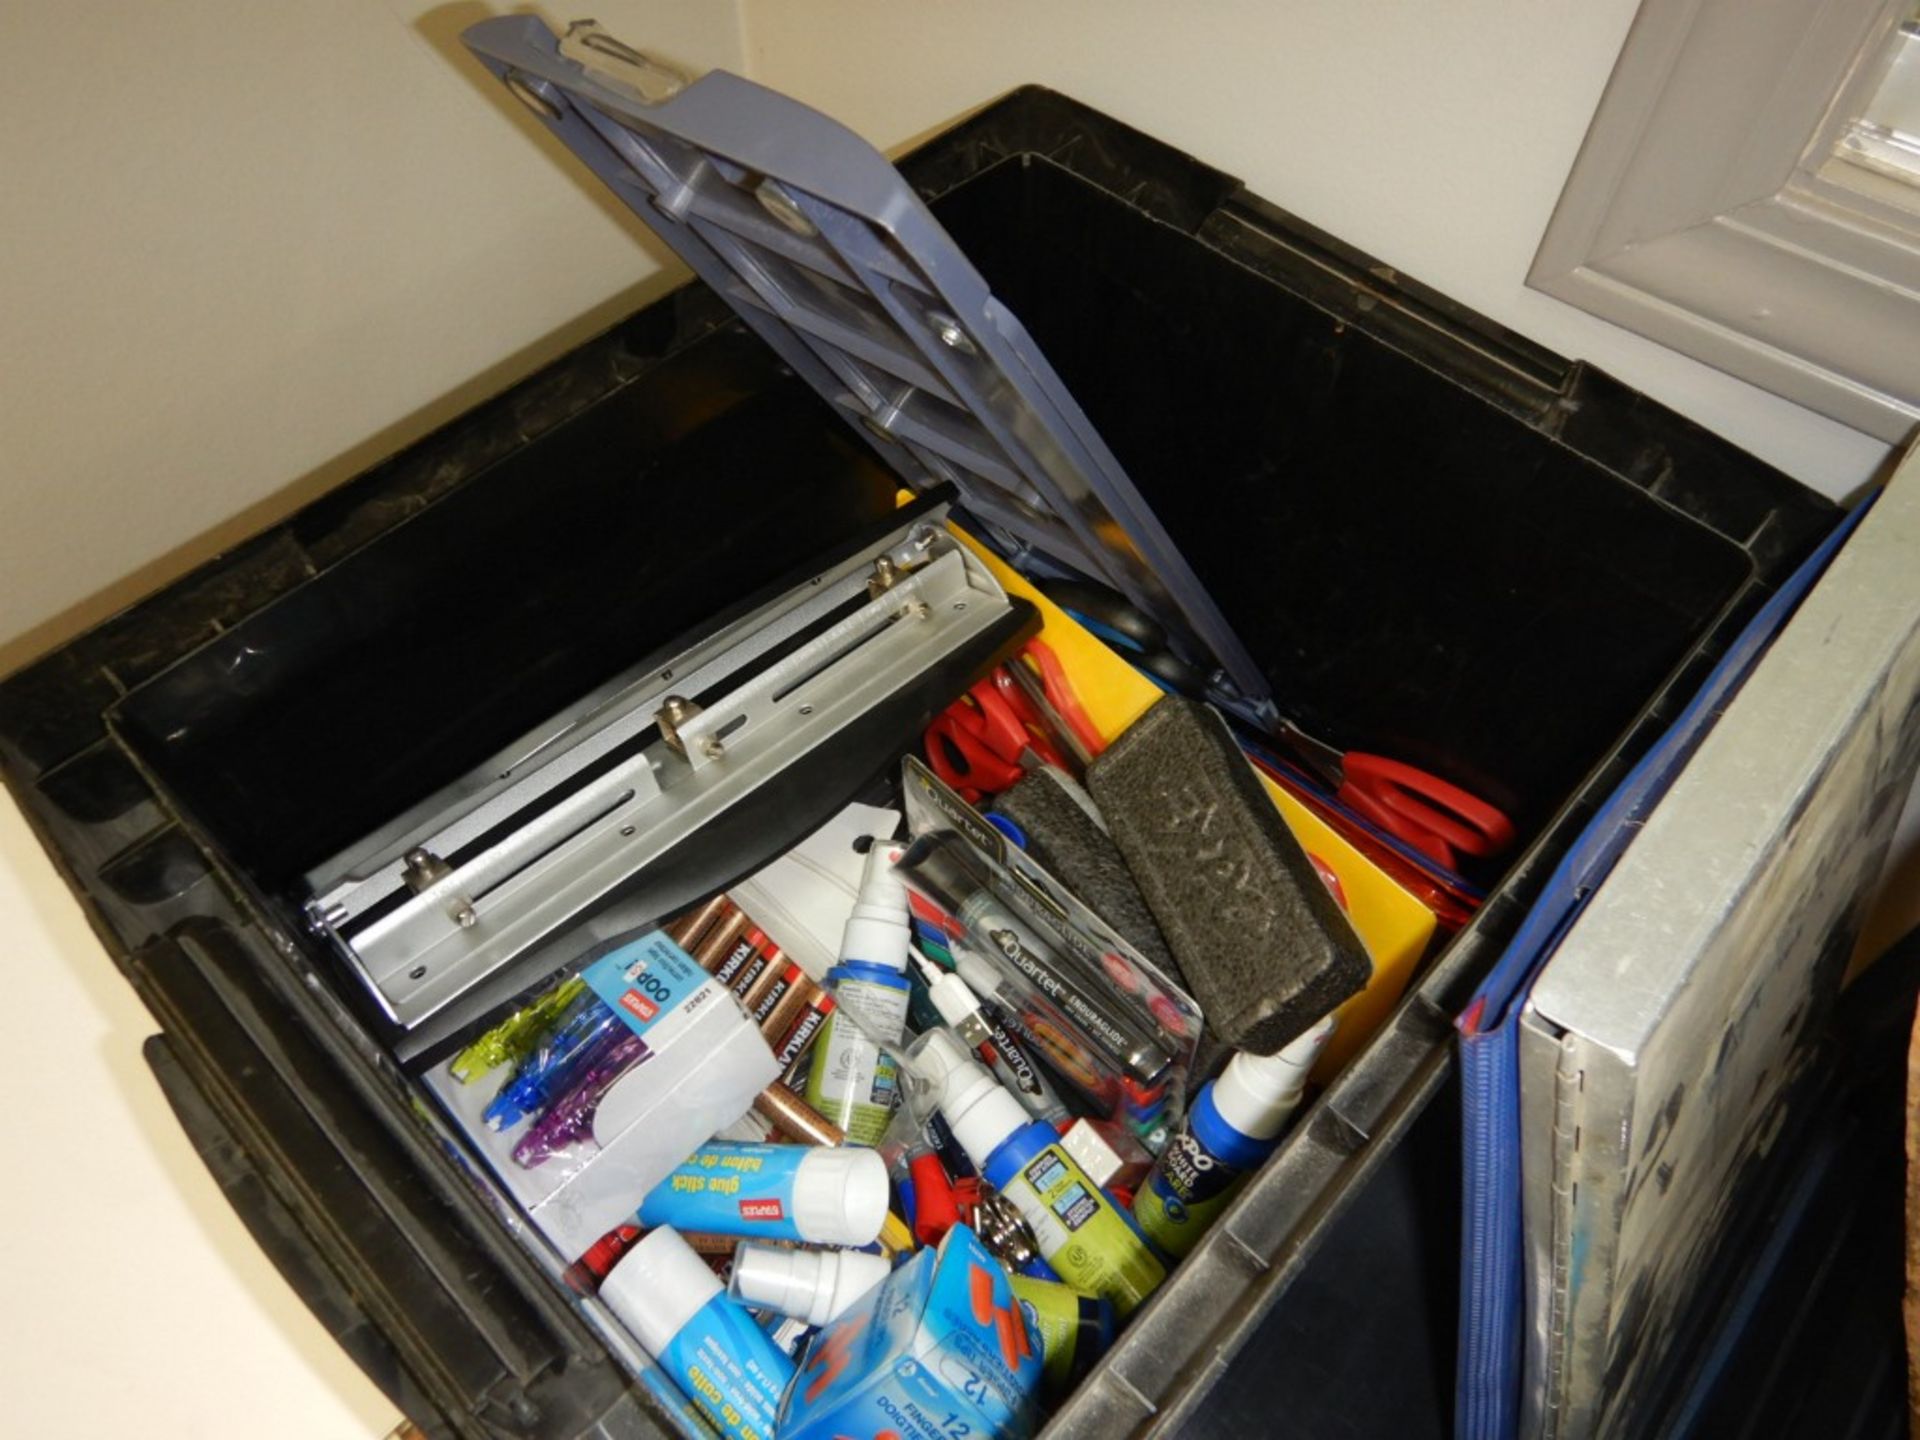 L/O ASSORTED OFFICE SUPPLIES INCLUDING CLIP BOARD, FILE TRAYS, HOLE PUNCHES, ETC - Image 4 of 5